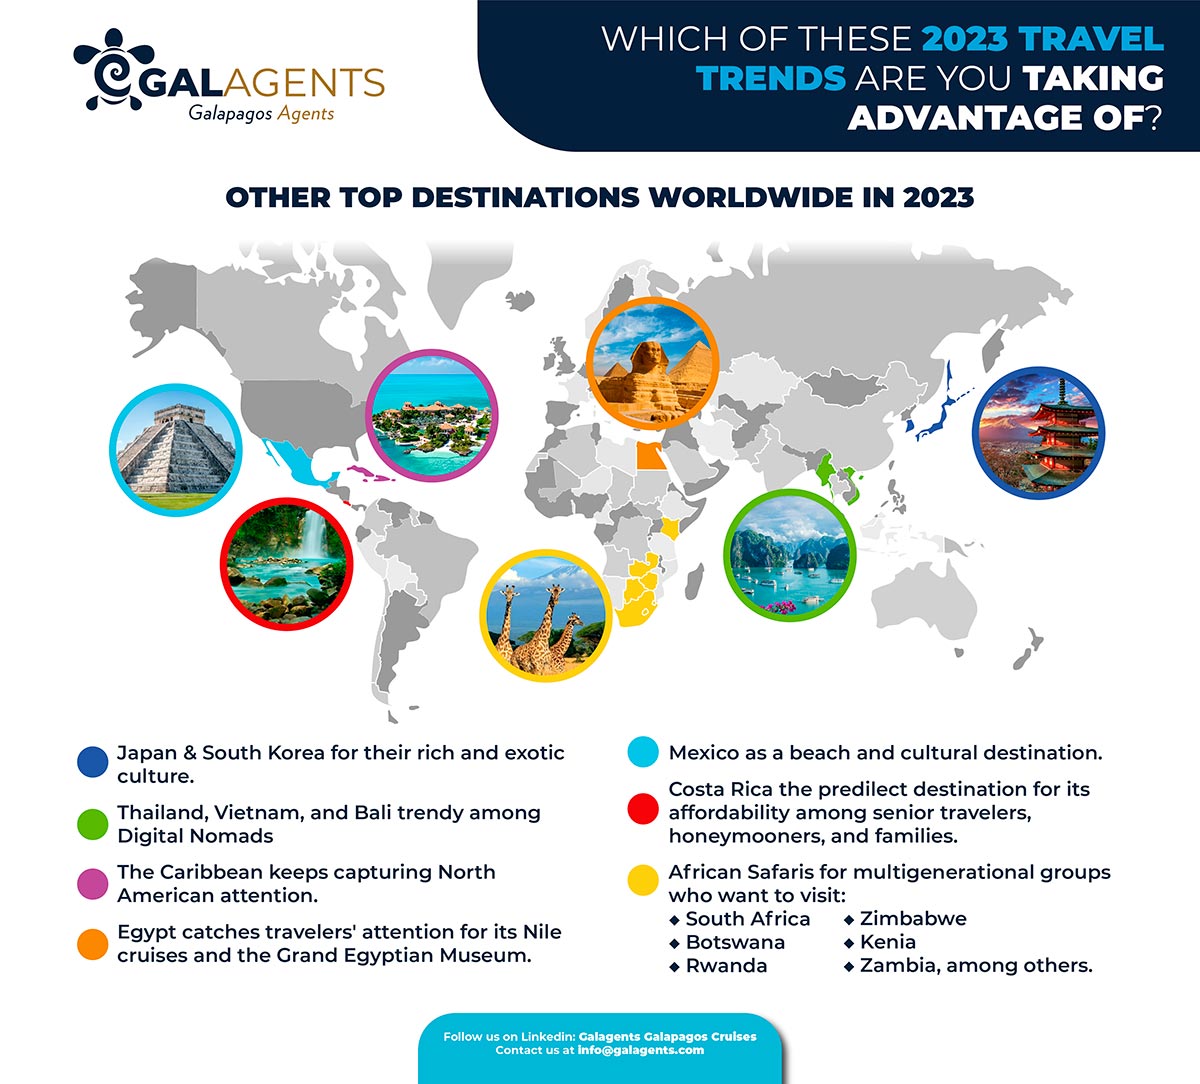 Other top destinations worldwide in 2023